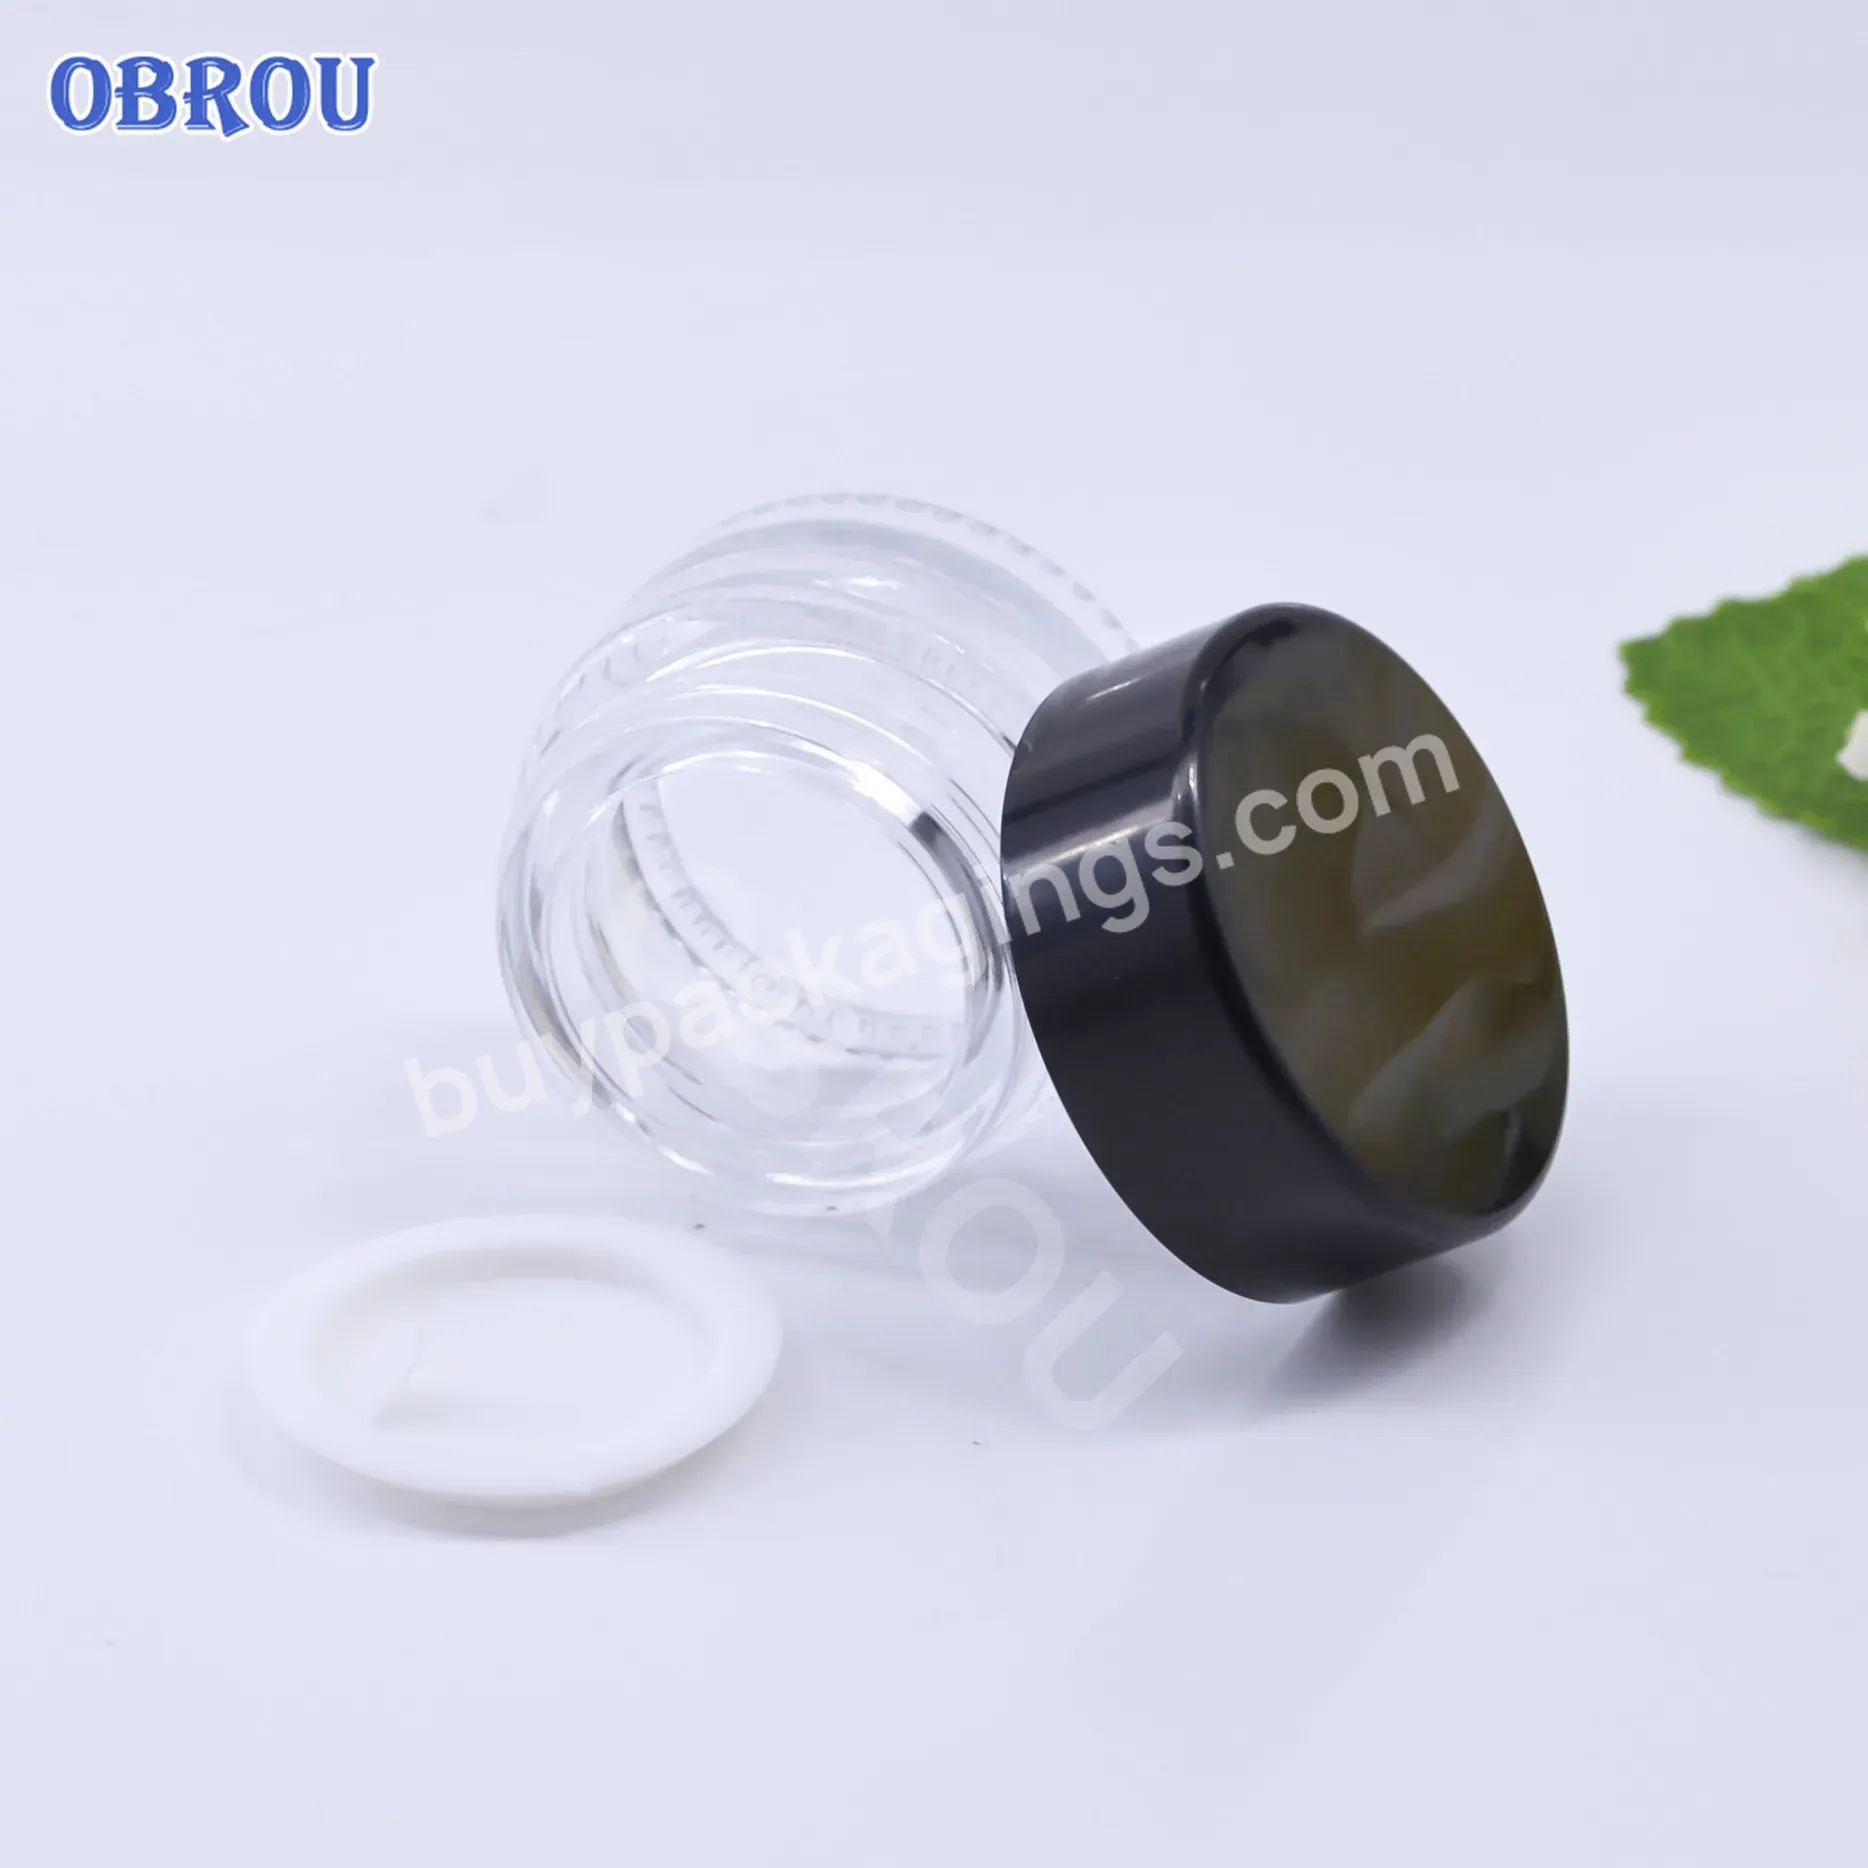 Hot Sale Empty Cosmetic Face Cream Container Jars 5g 10g 15g 20g 25g 30g 50g 60g 100g Glass Jar - Buy 50g Glass Jar,25g Face Cream Jars,30g 60g Cosmetic Container.